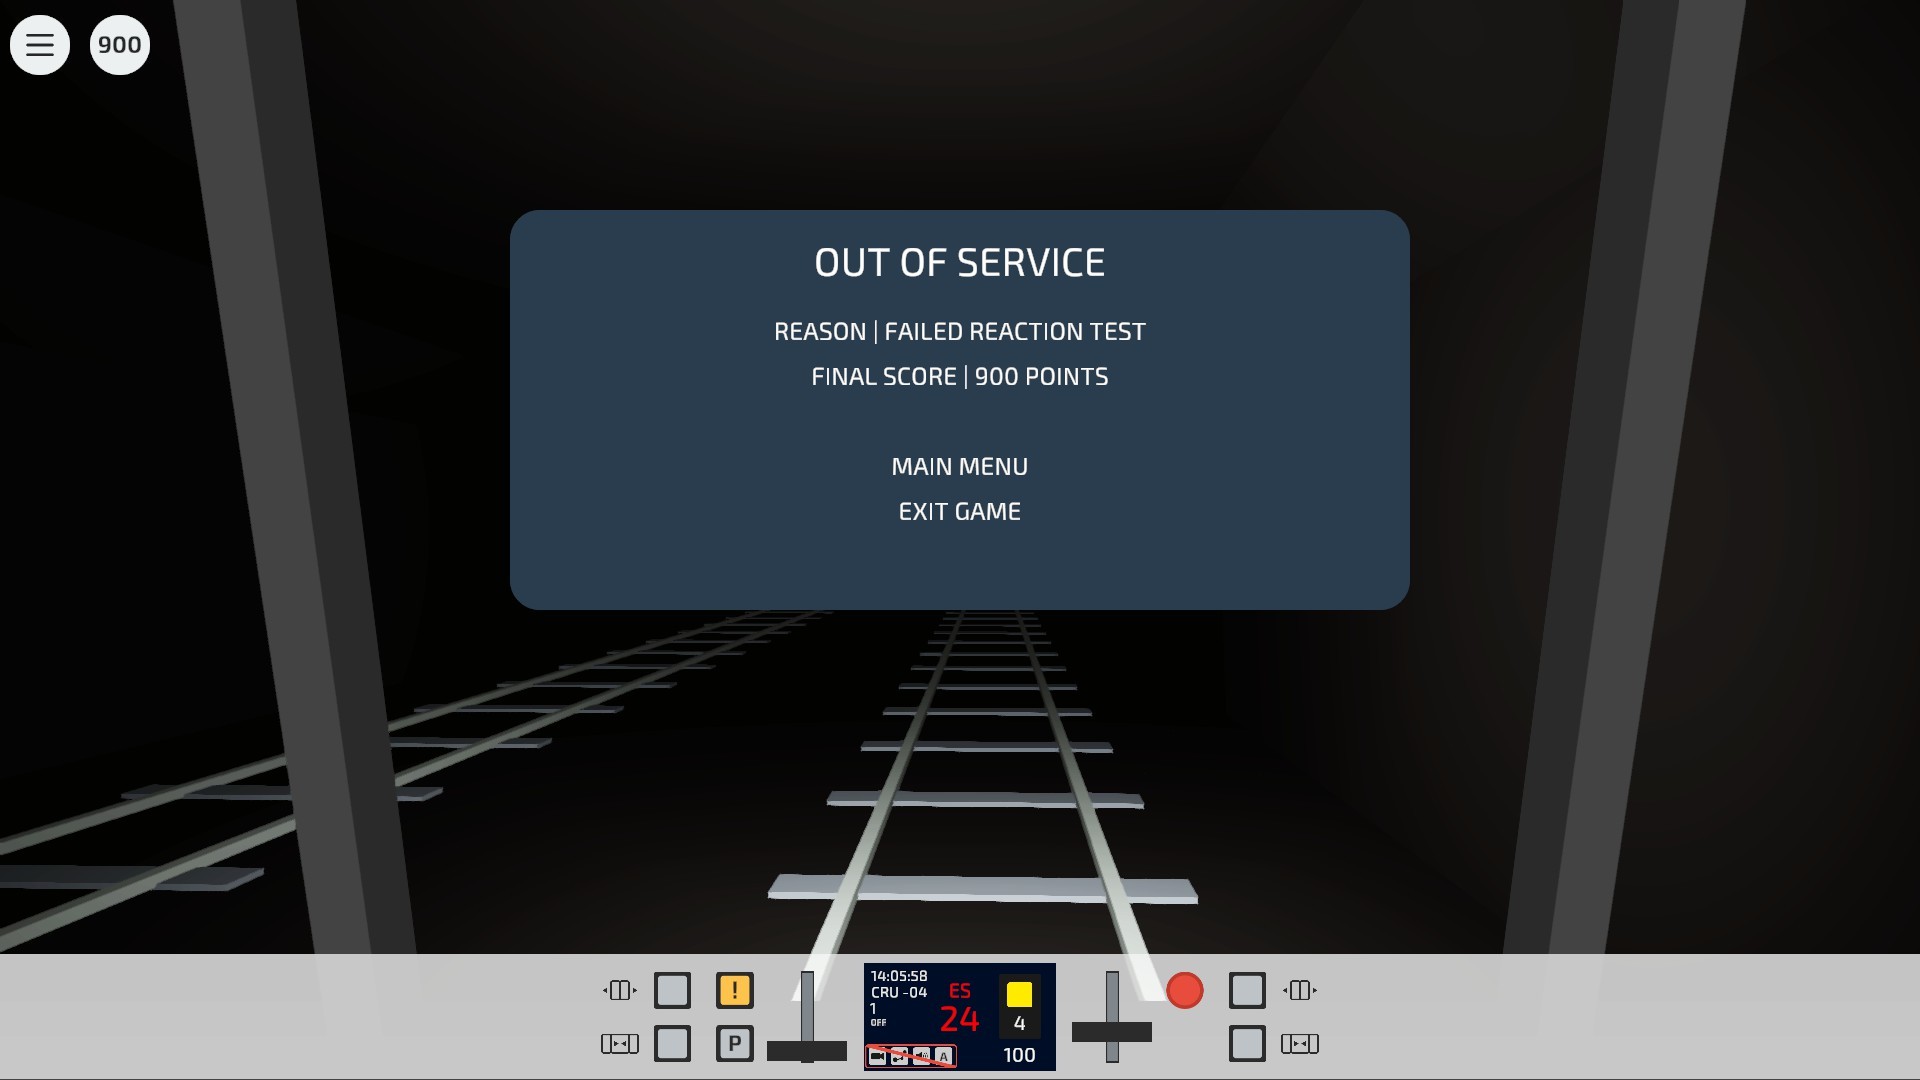 Metro Mover Free Download